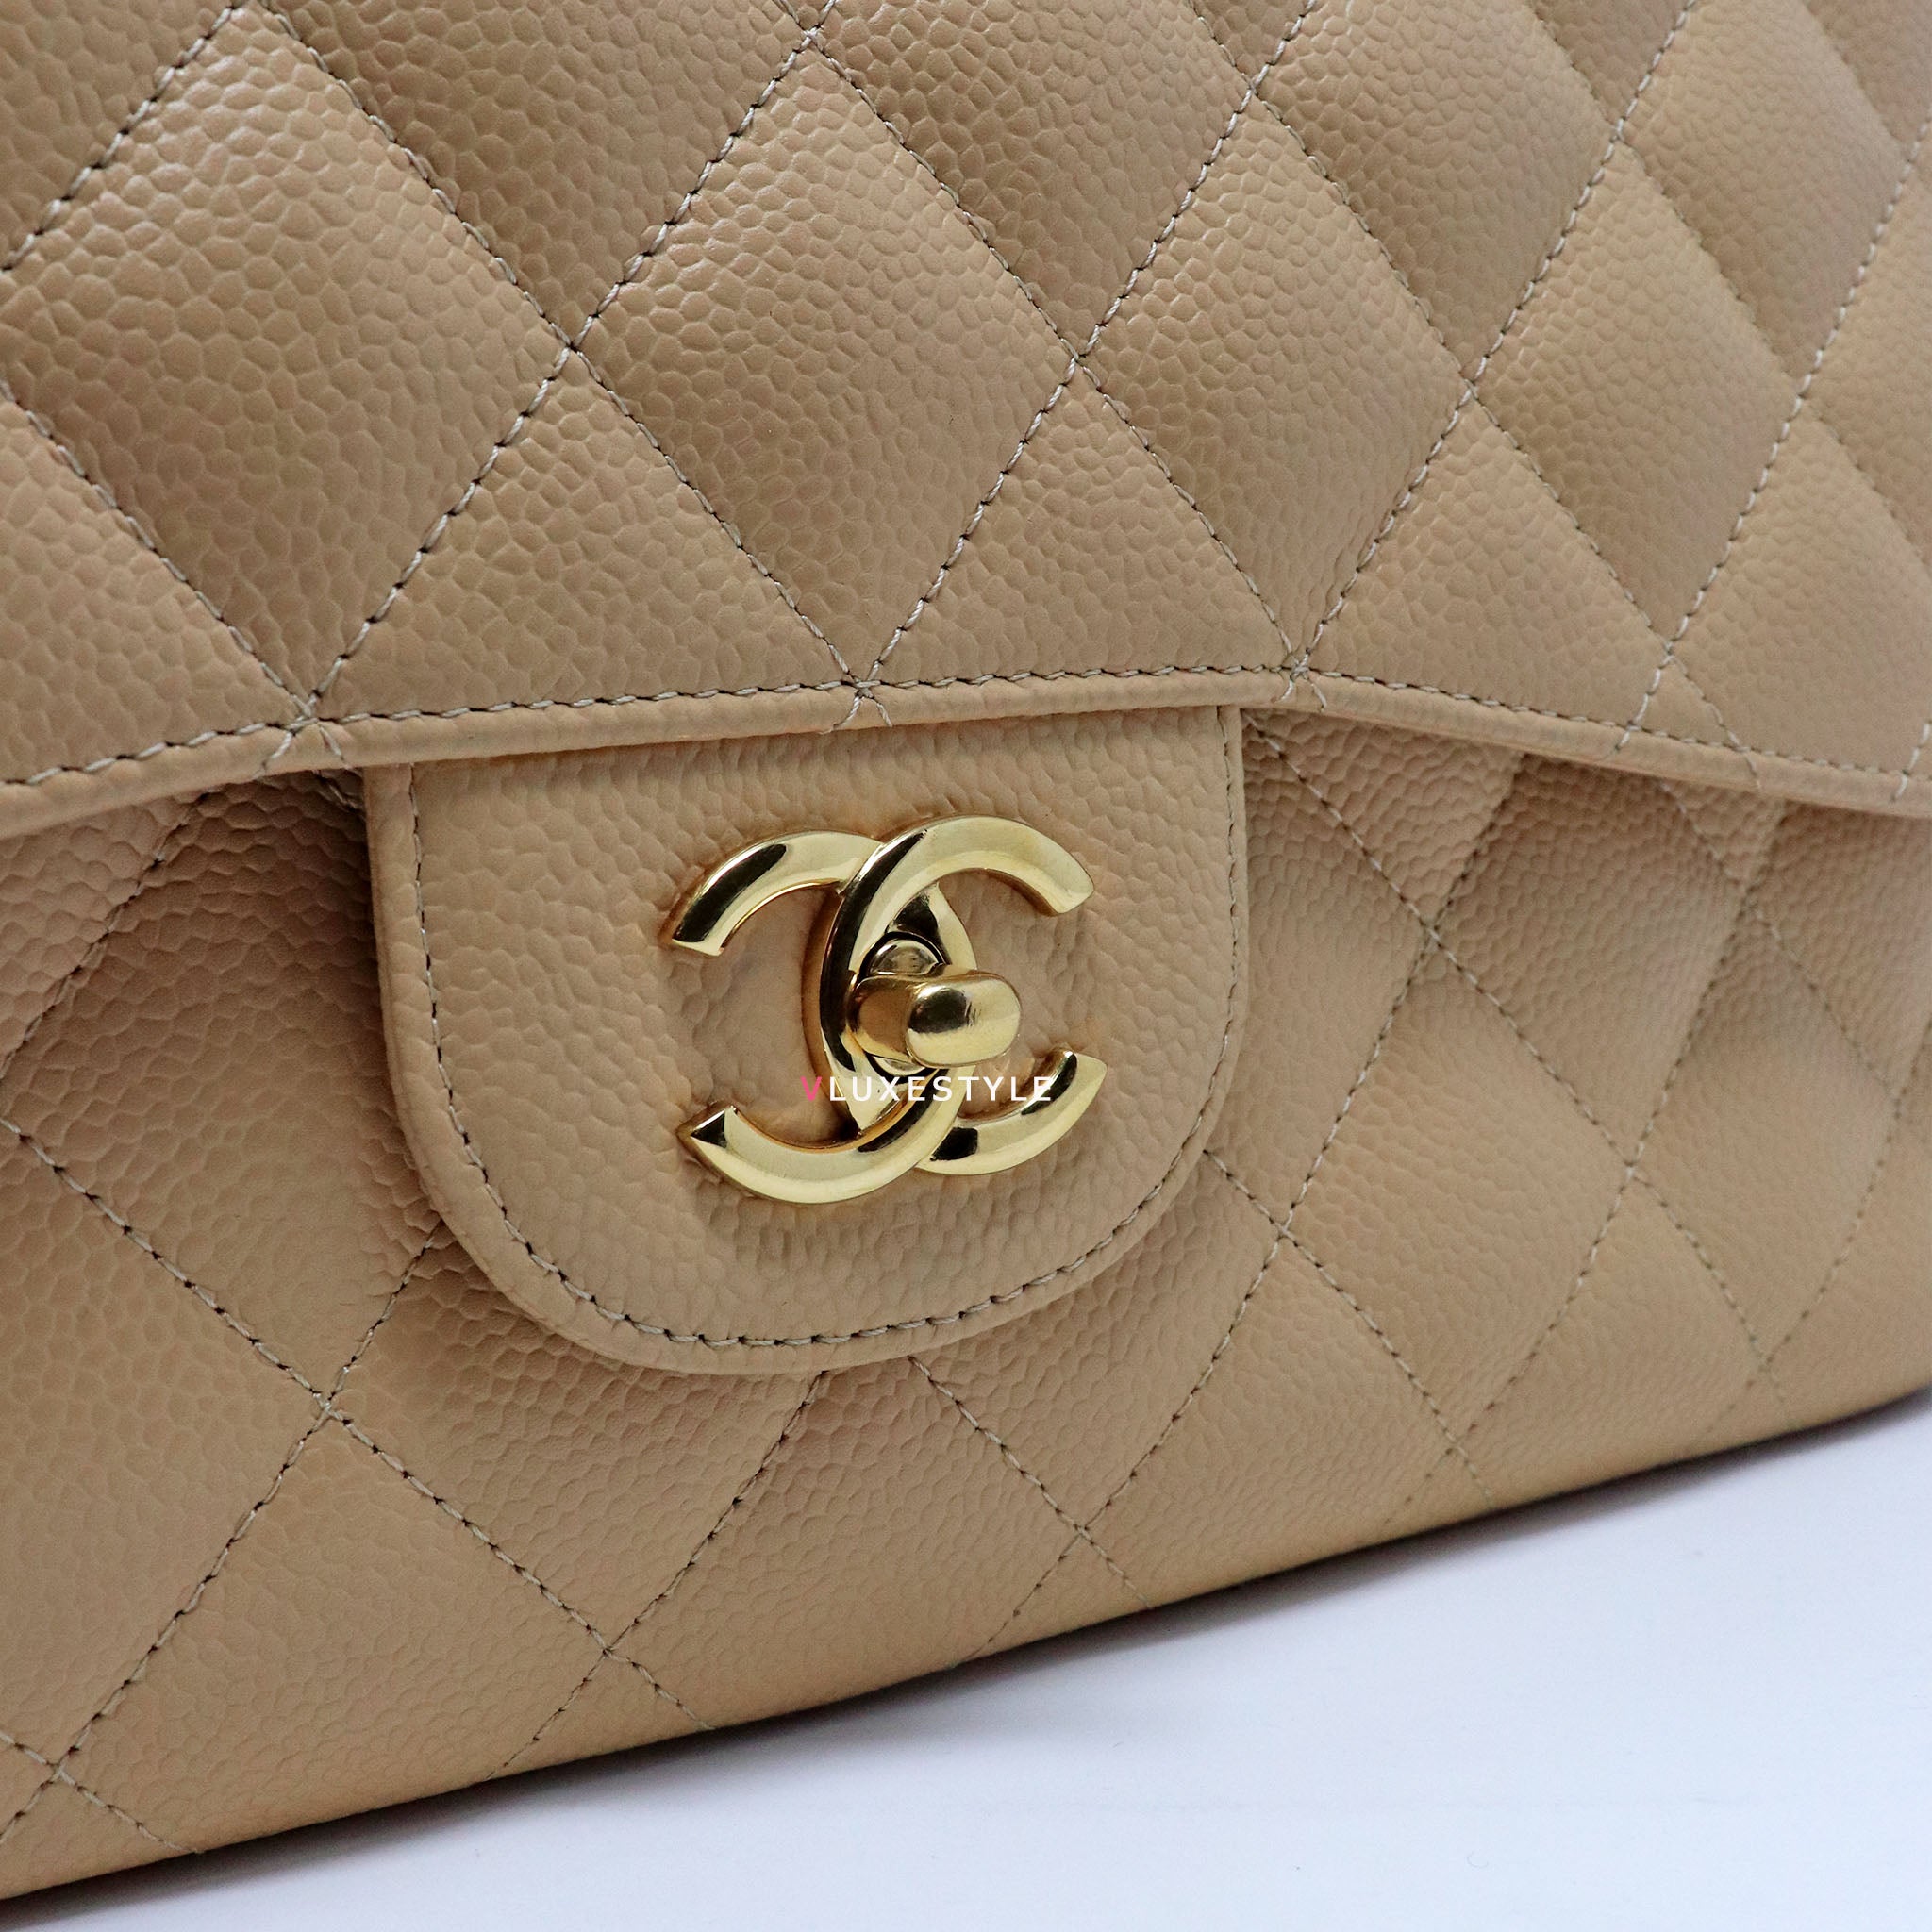 Chanel Classic Flap Bag Beige - 102 For Sale on 1stDibs